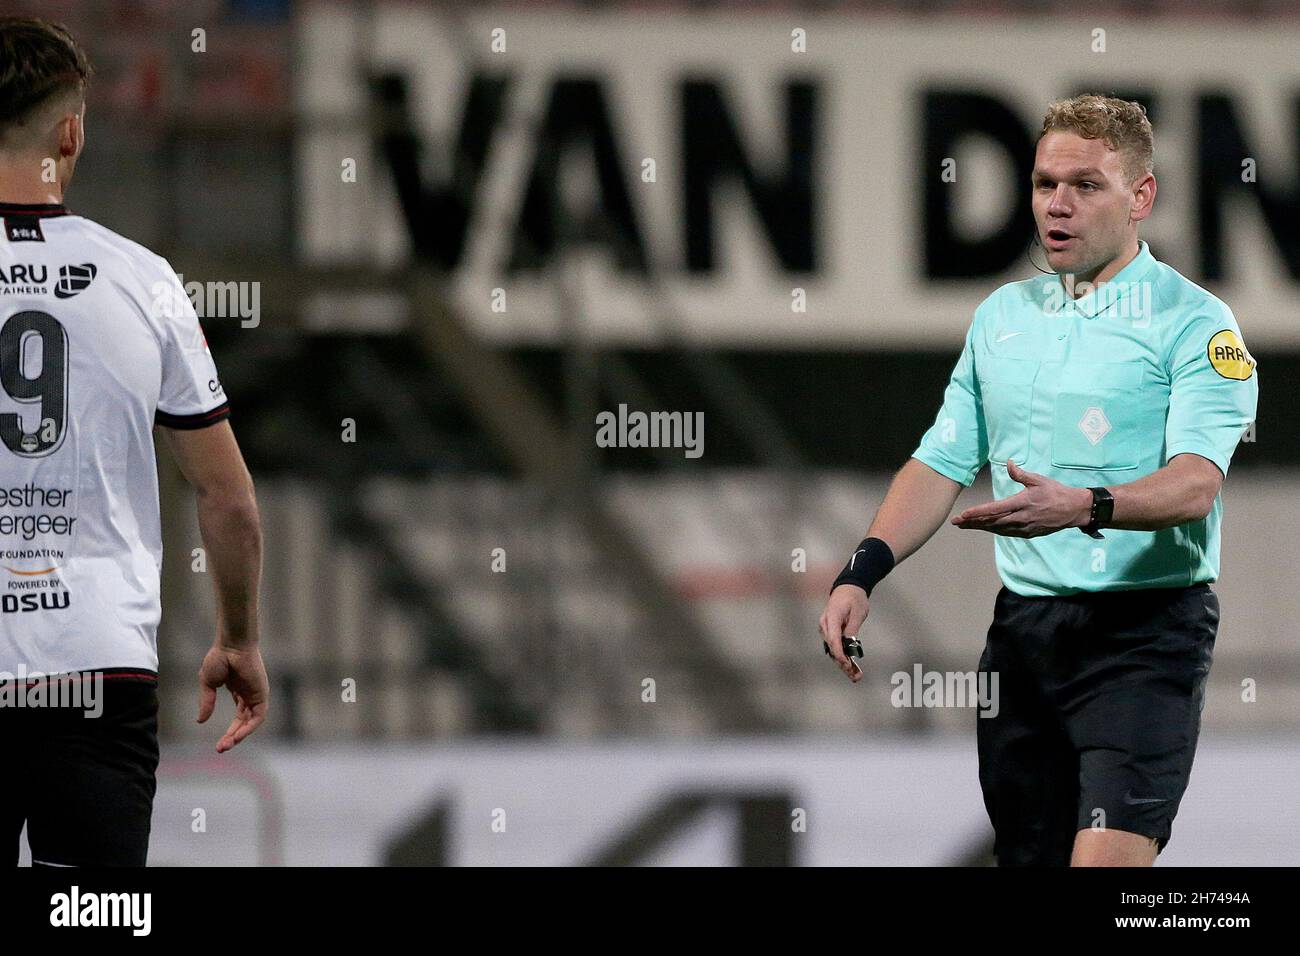 HELMOND, NETHERLANDS - NOVEMBER 19: Thijs Dallinga of Excelsior Rotterdam and referee Alex Bos during the Dutch Keukenkampioendivisie match between Helmond Sport and Excelsior Rotterdam at SolarUnie Stadion on November 19, 2021 in Helmond, Netherlands (Photo by Perry van de Leuvert/Orange Pictures) Stock Photo